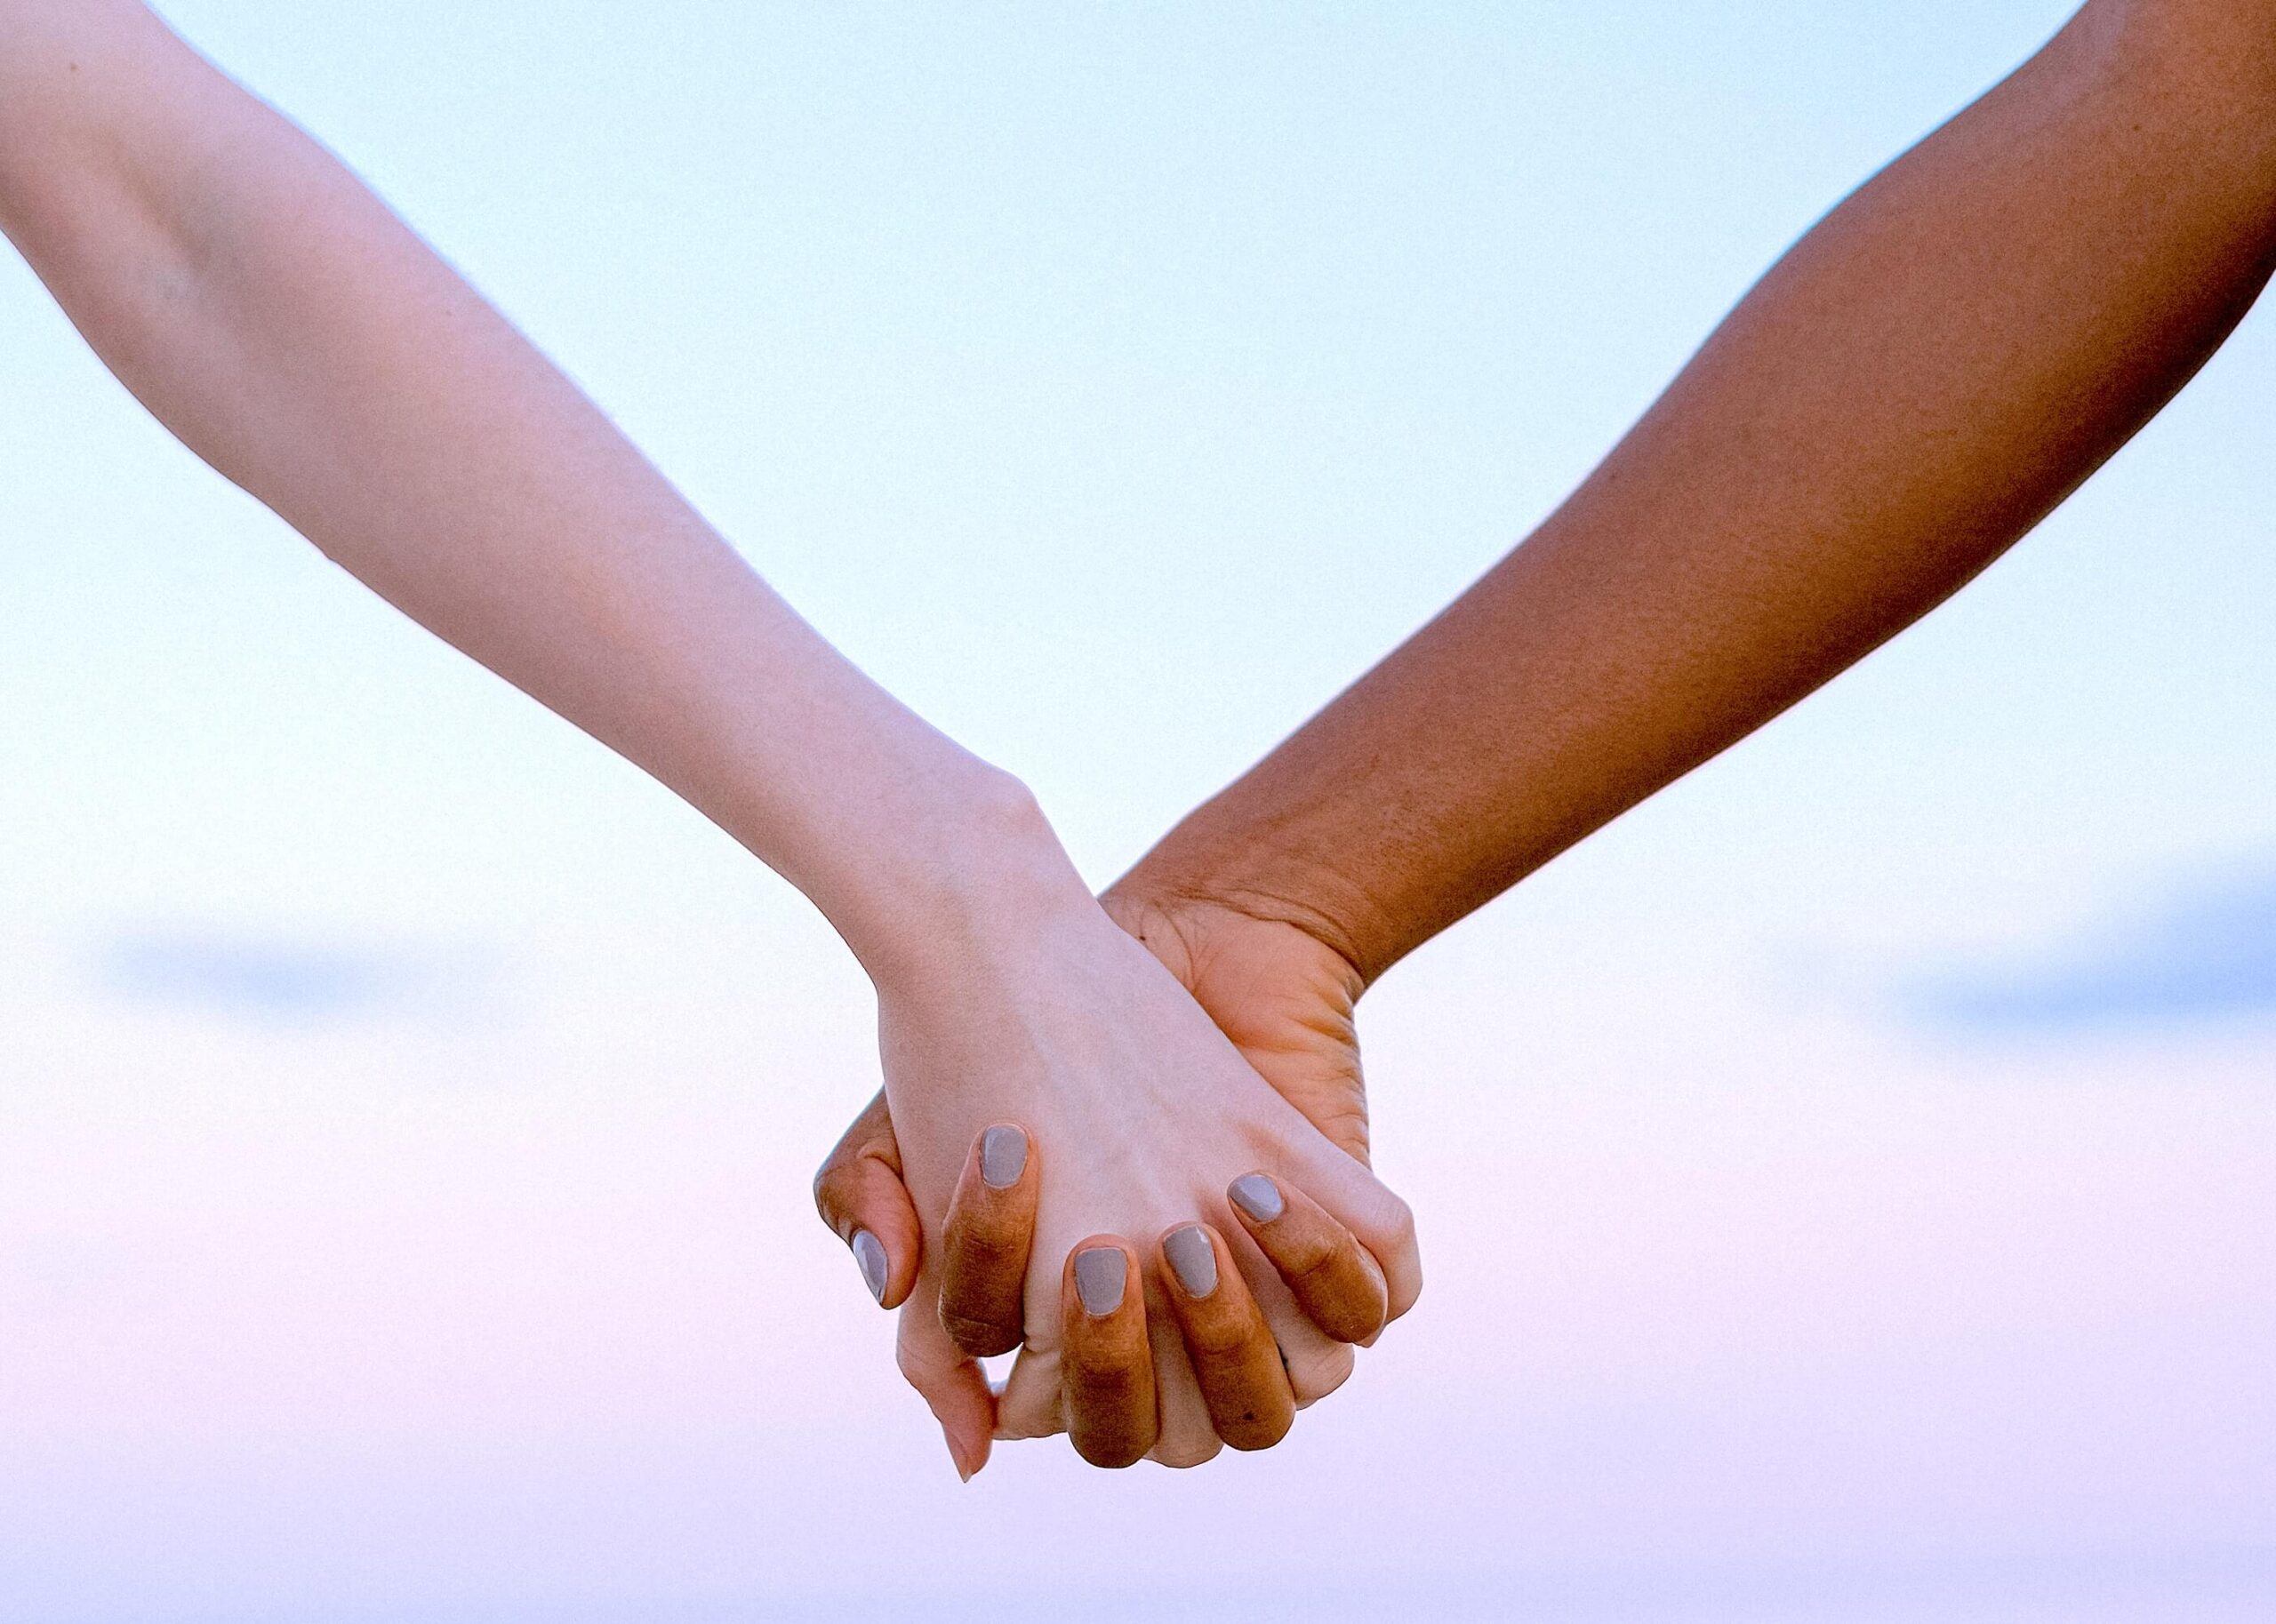 Human Design split definition | Two hands holding each other against the backdrop of a pink sky.